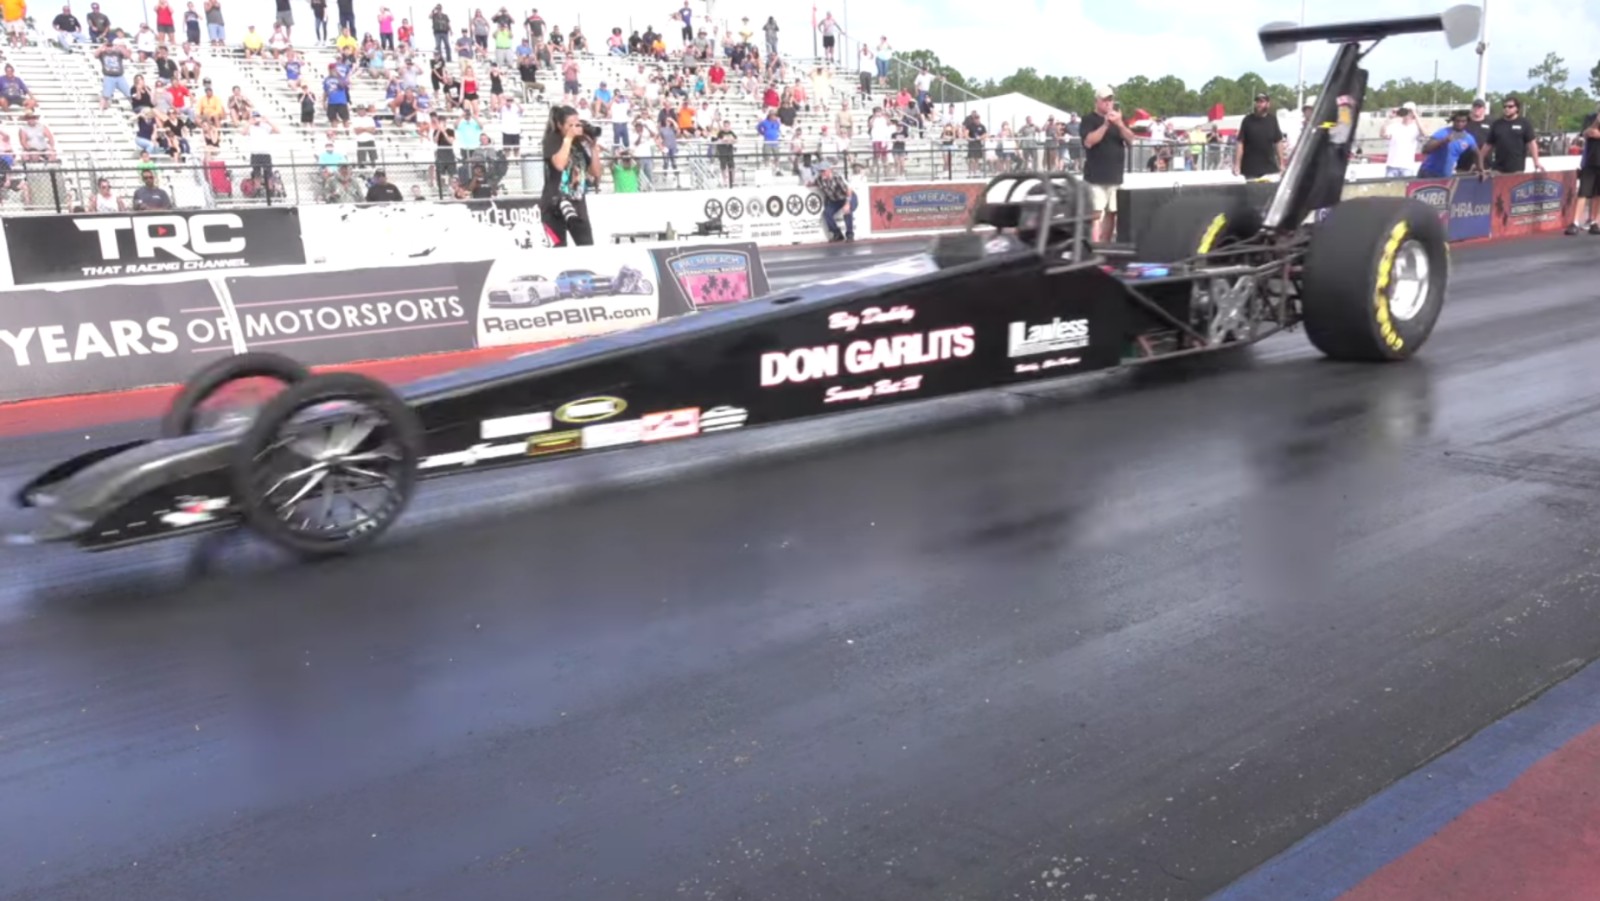 "Big Daddy" drag racer Don Garlits sets electric dragster record